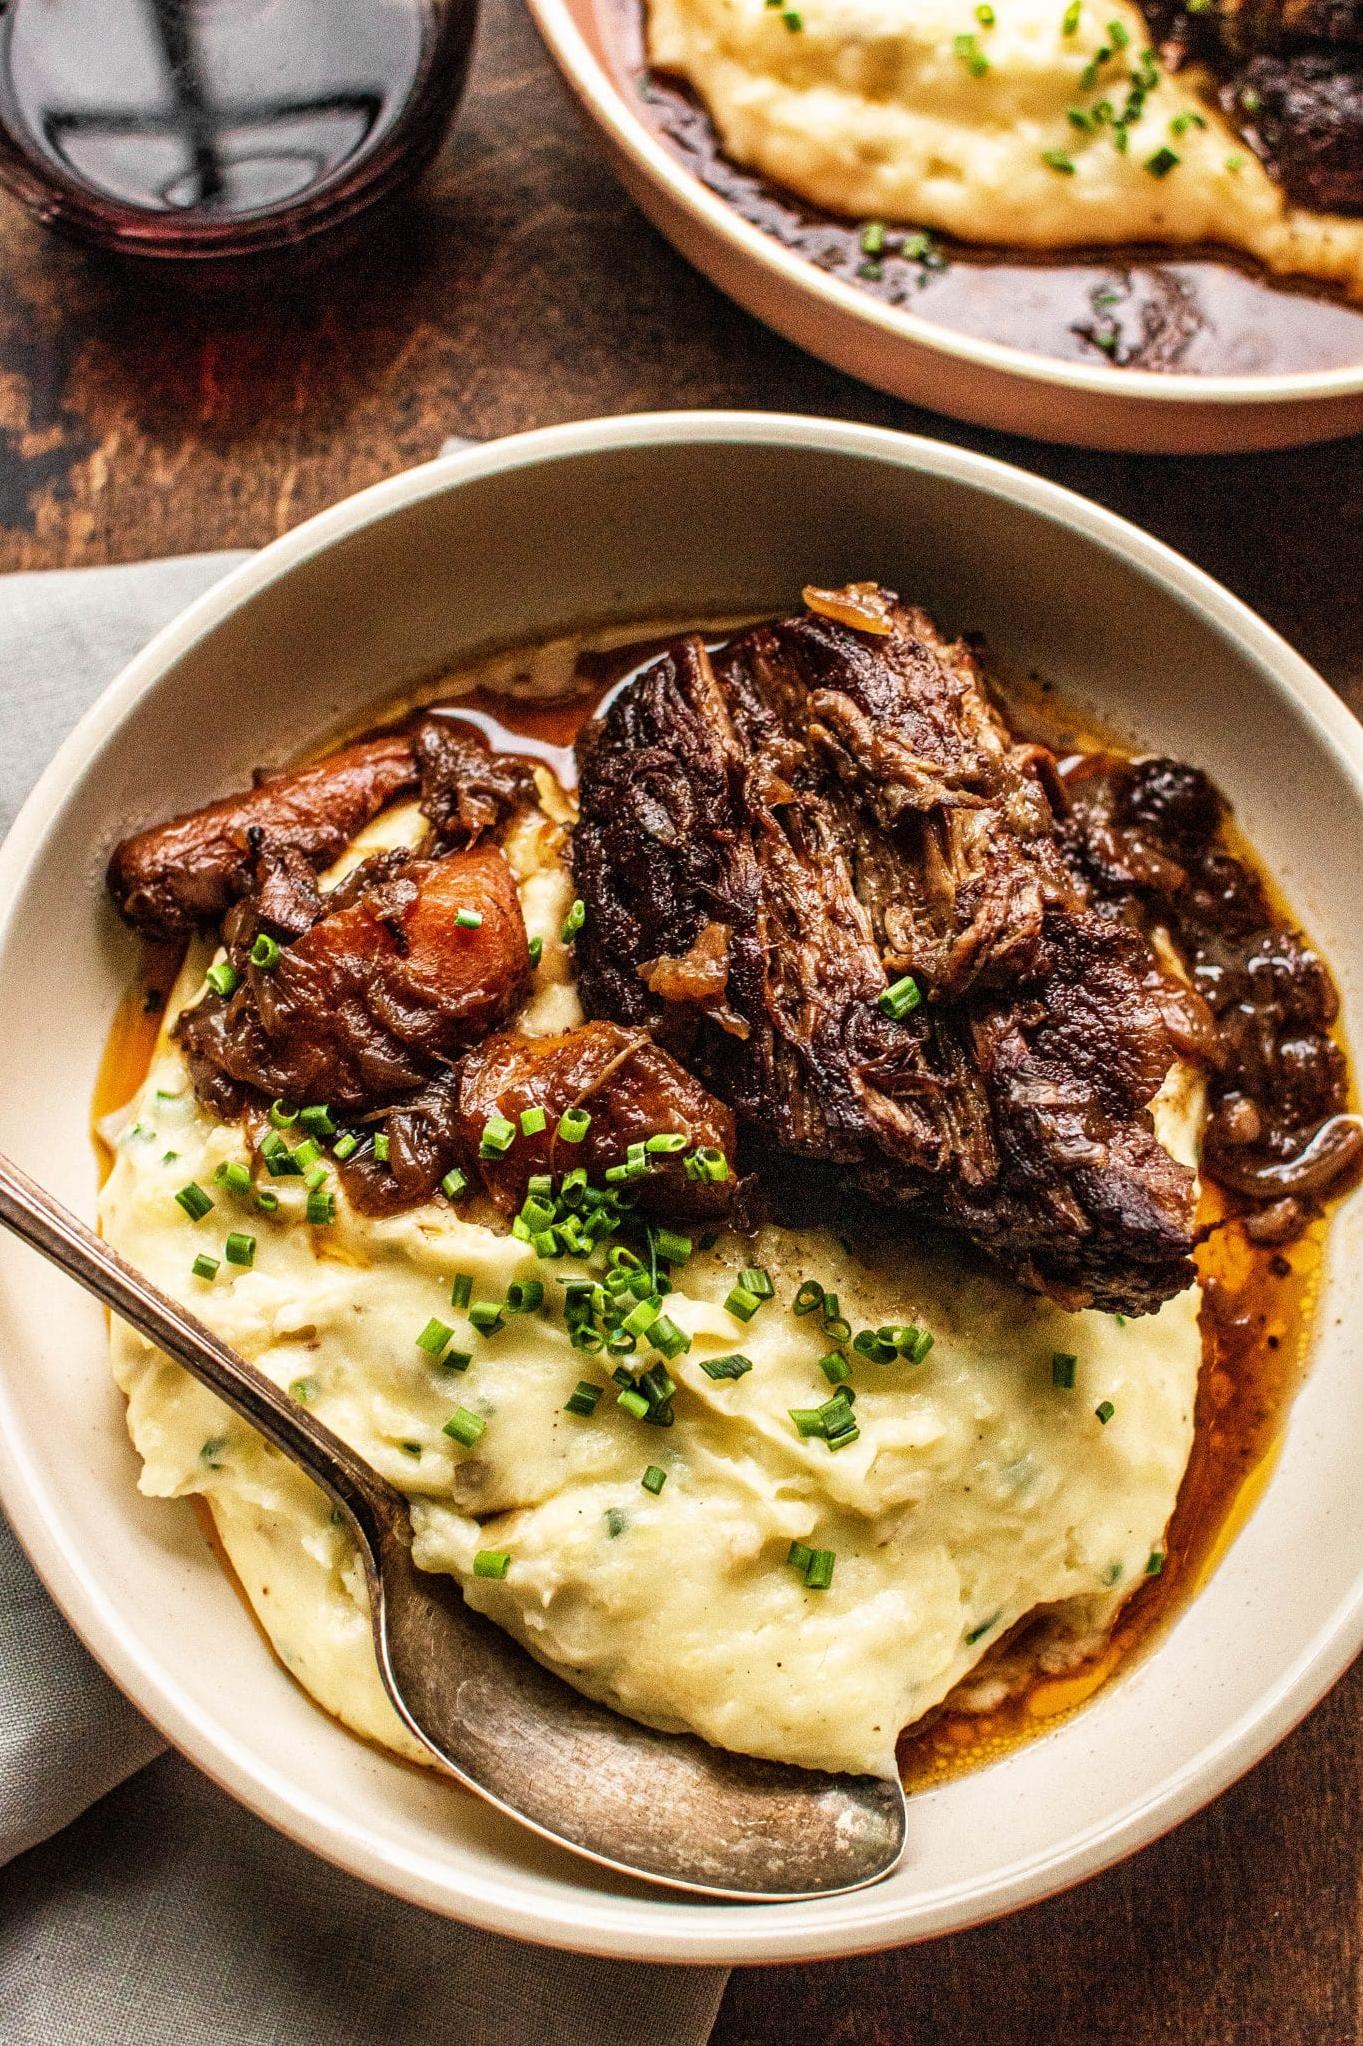  Slow-cooked to perfection, this beef is guaranteed to melt in your mouth.